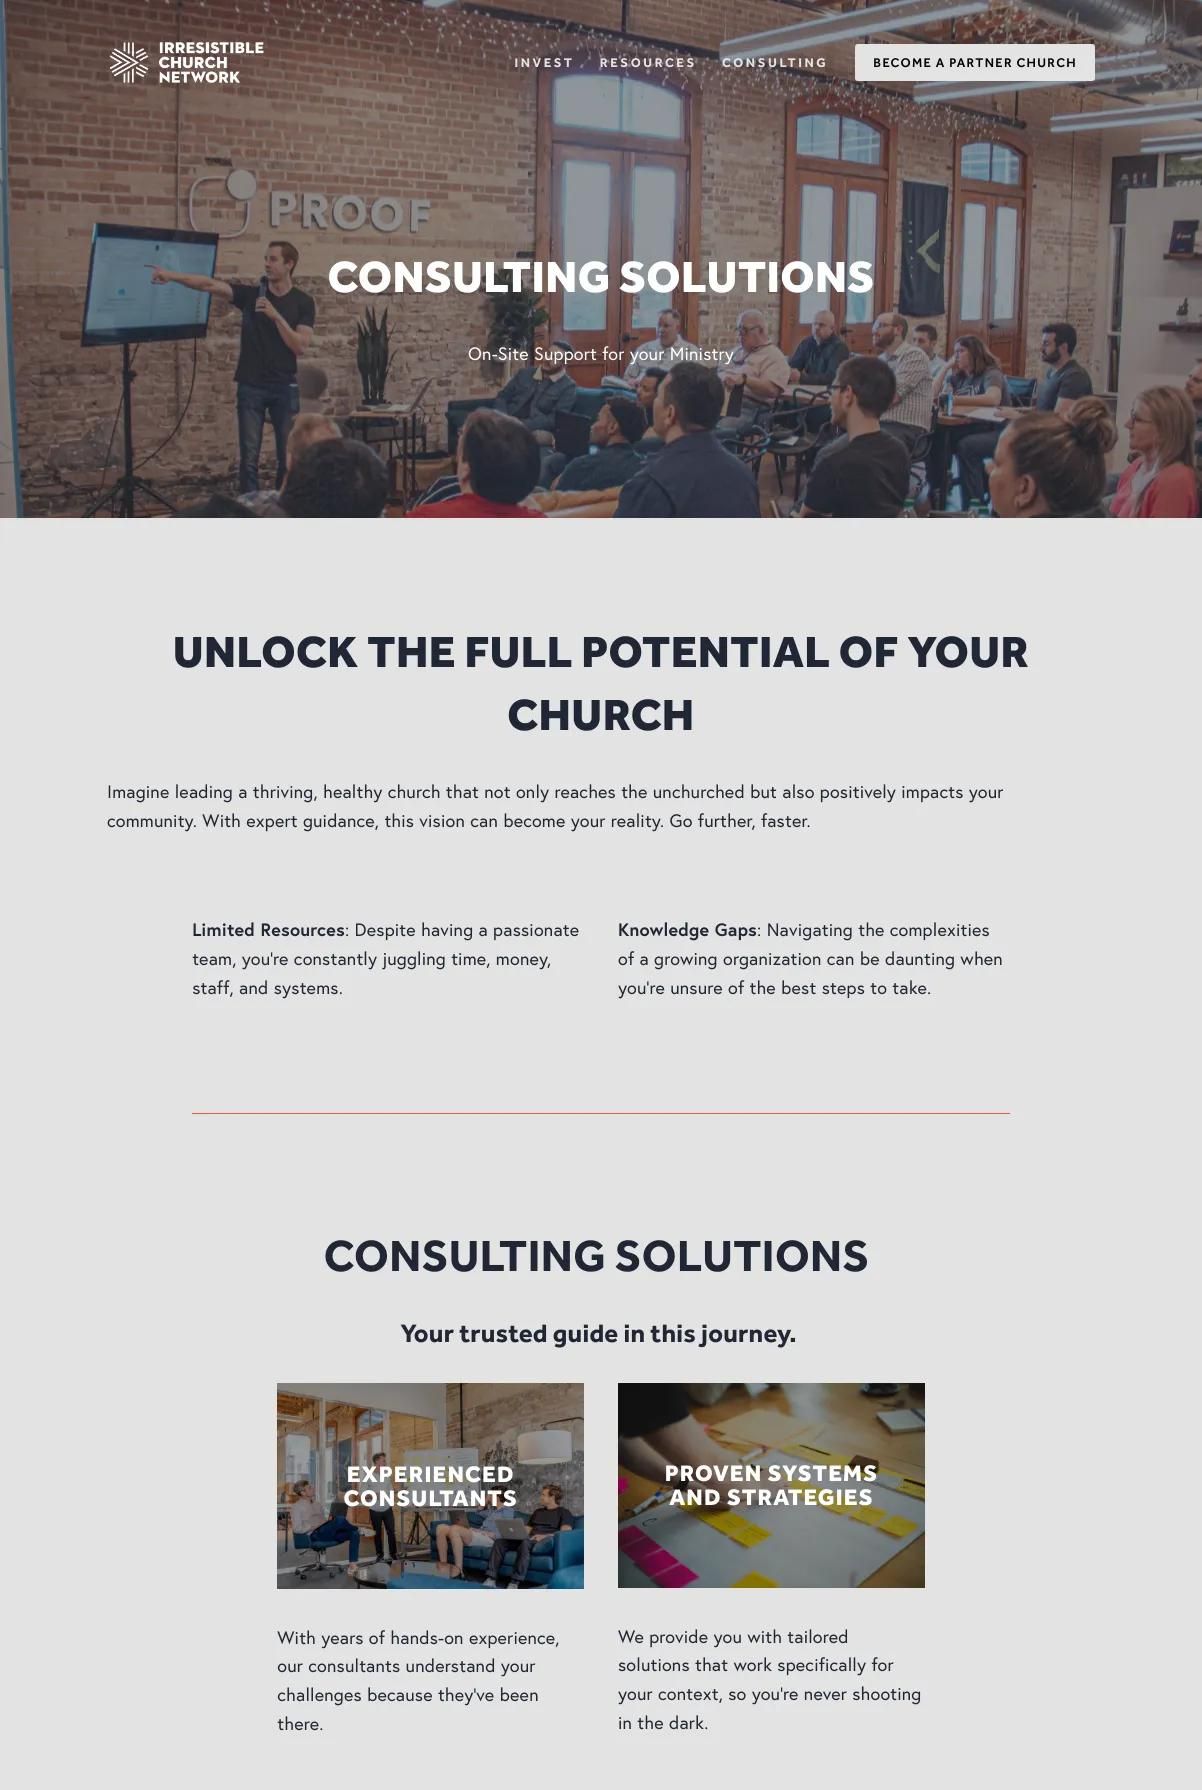 Screenshot 2 of Irresistible Church Network (Example Squarespace Church Website)